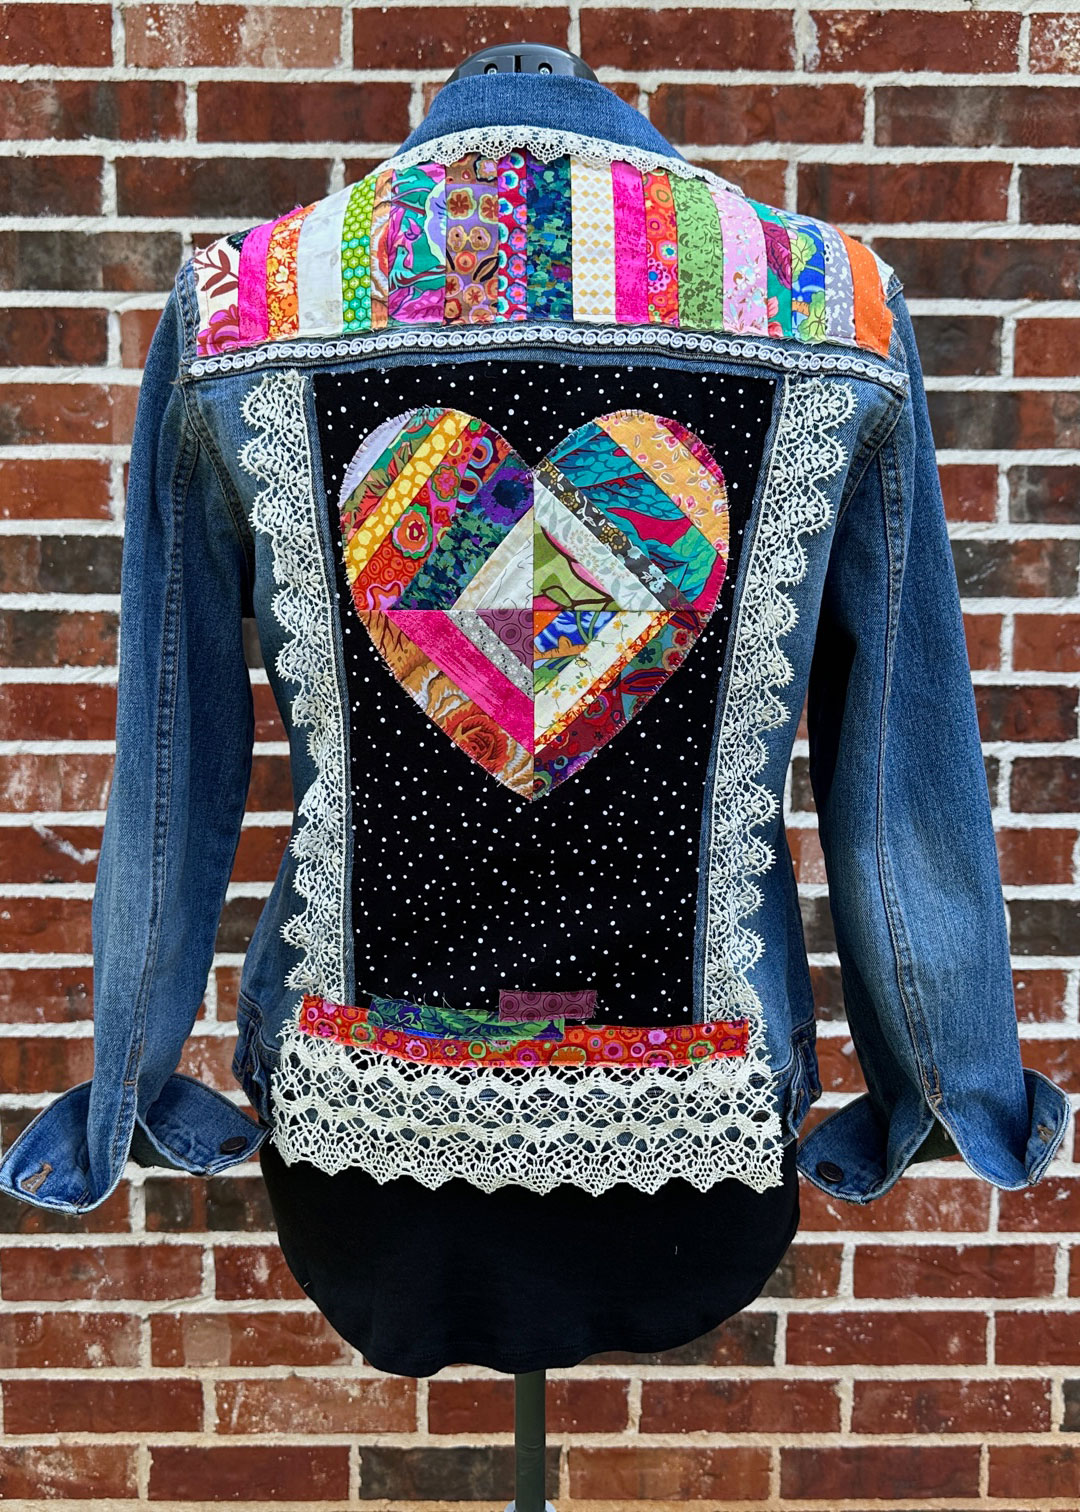 Upcycle a Denim Jacket with Patchwork & Lace Embellishments - WeAllSew